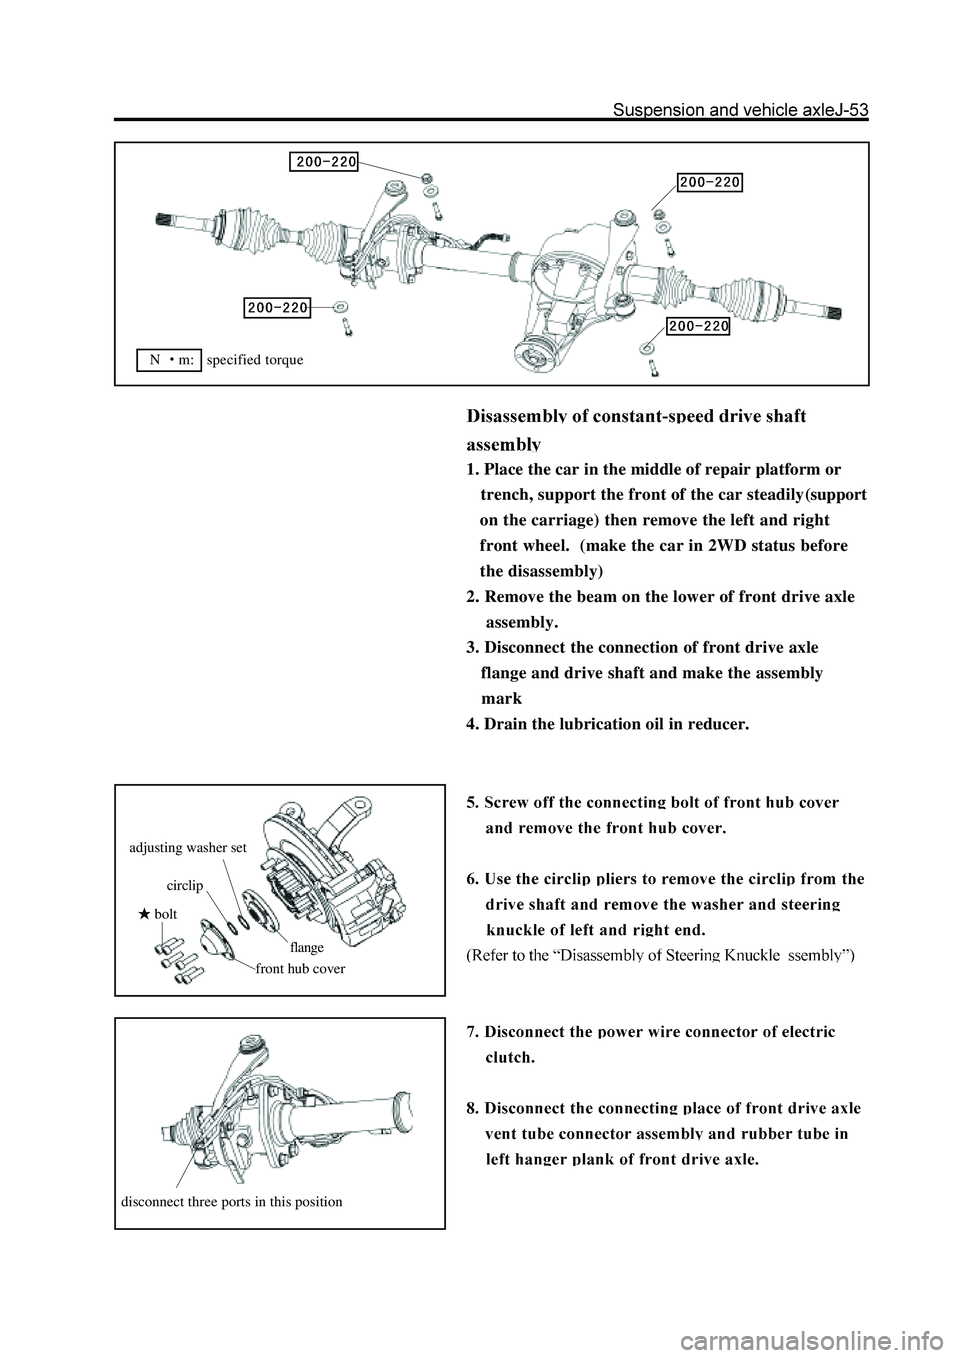 GREAT WALL HOVER 2006  Service Repair Manual 1. Place the car in the middle of repair platform or
   trench, support the front of the car steadily(support
on the carriage) then remove the left and right
front wheel.  (make the car in 2WD status 